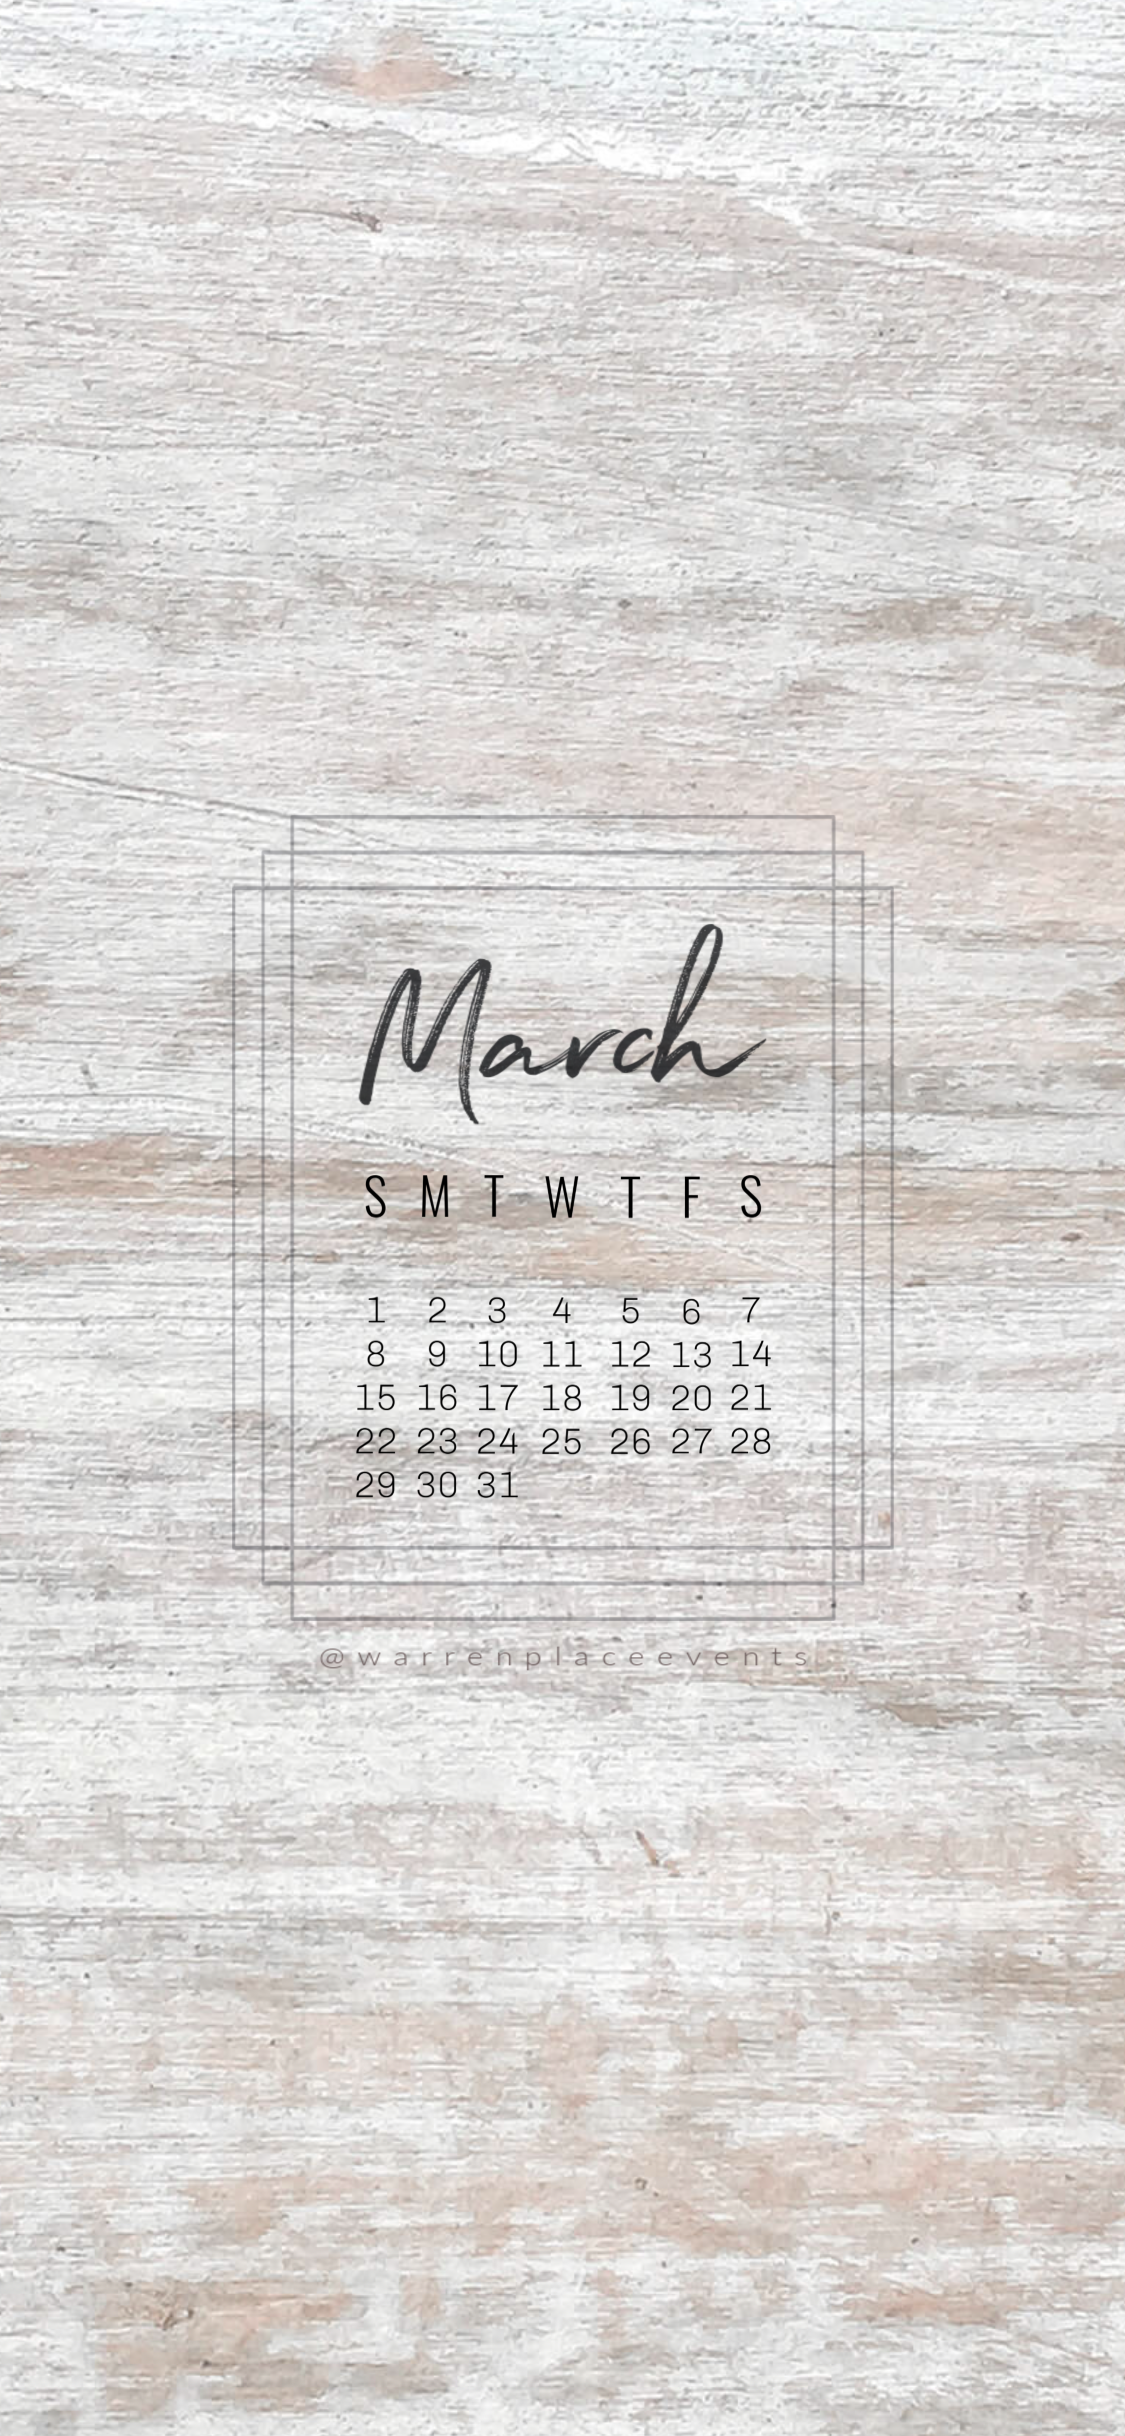 march pattern phone.png